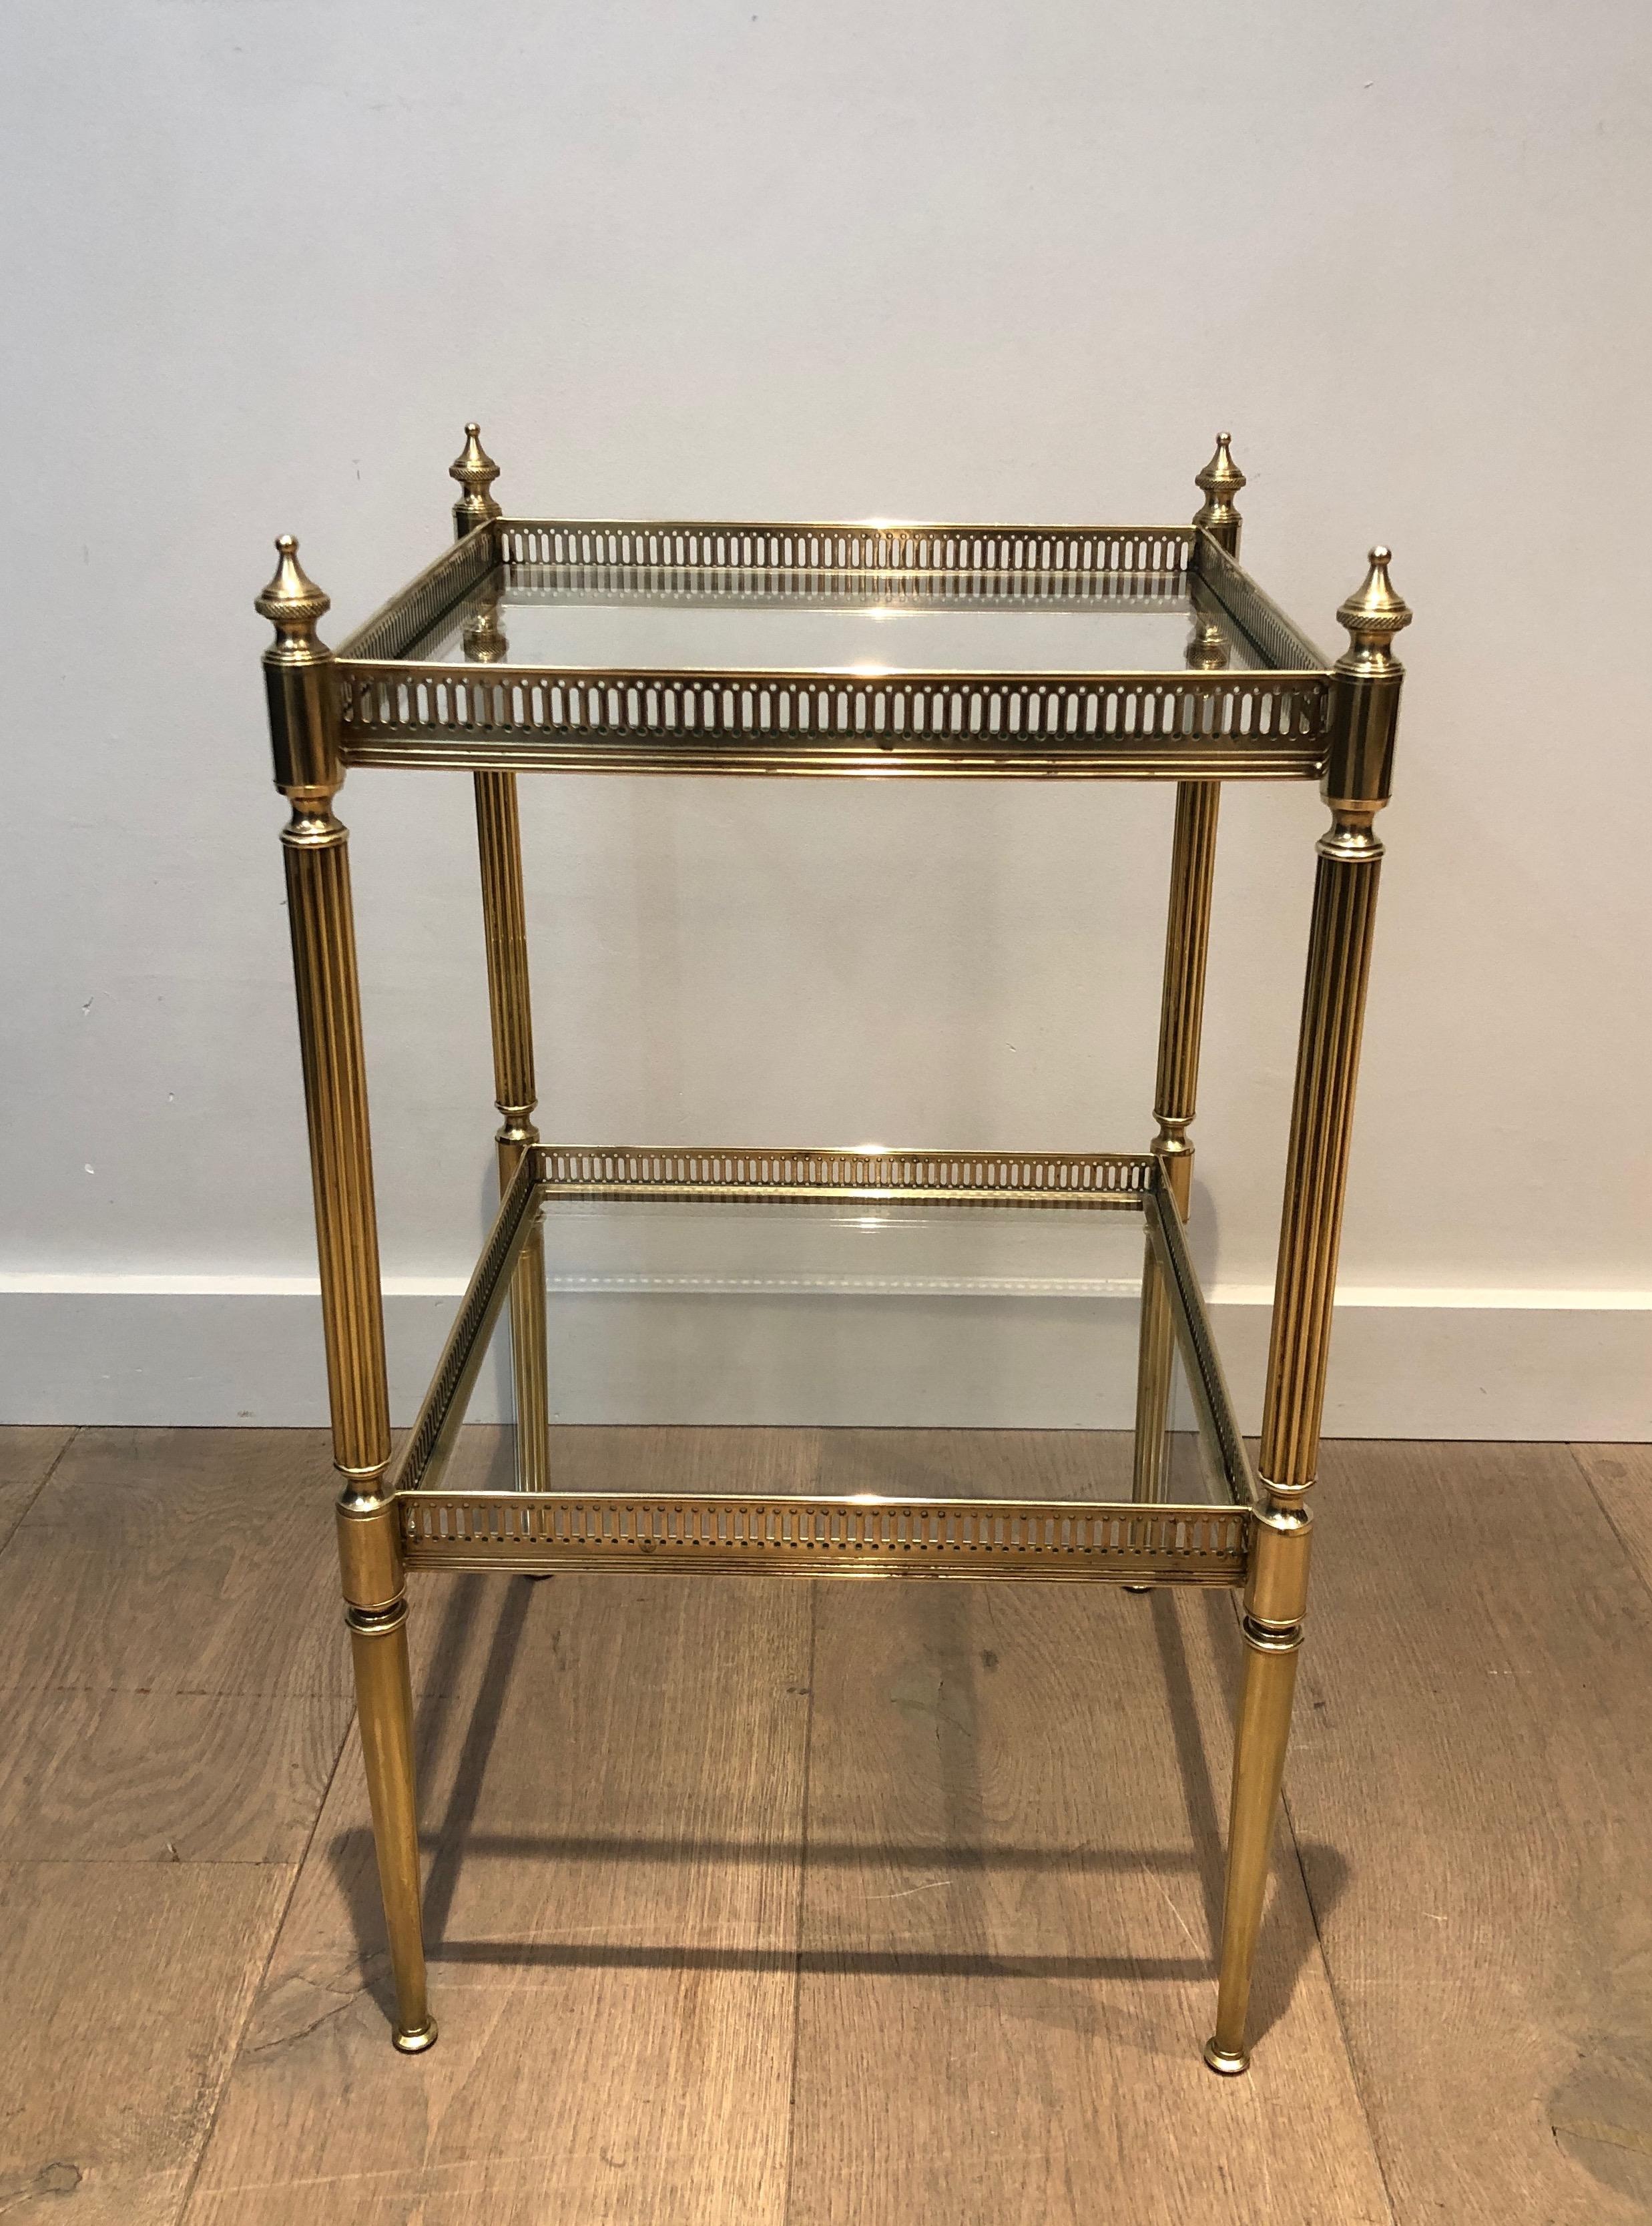 This neoclassical style side table is made of brass with glass shelves. This is a French work by famous French house Maison Jansen. Circa 1940.
  